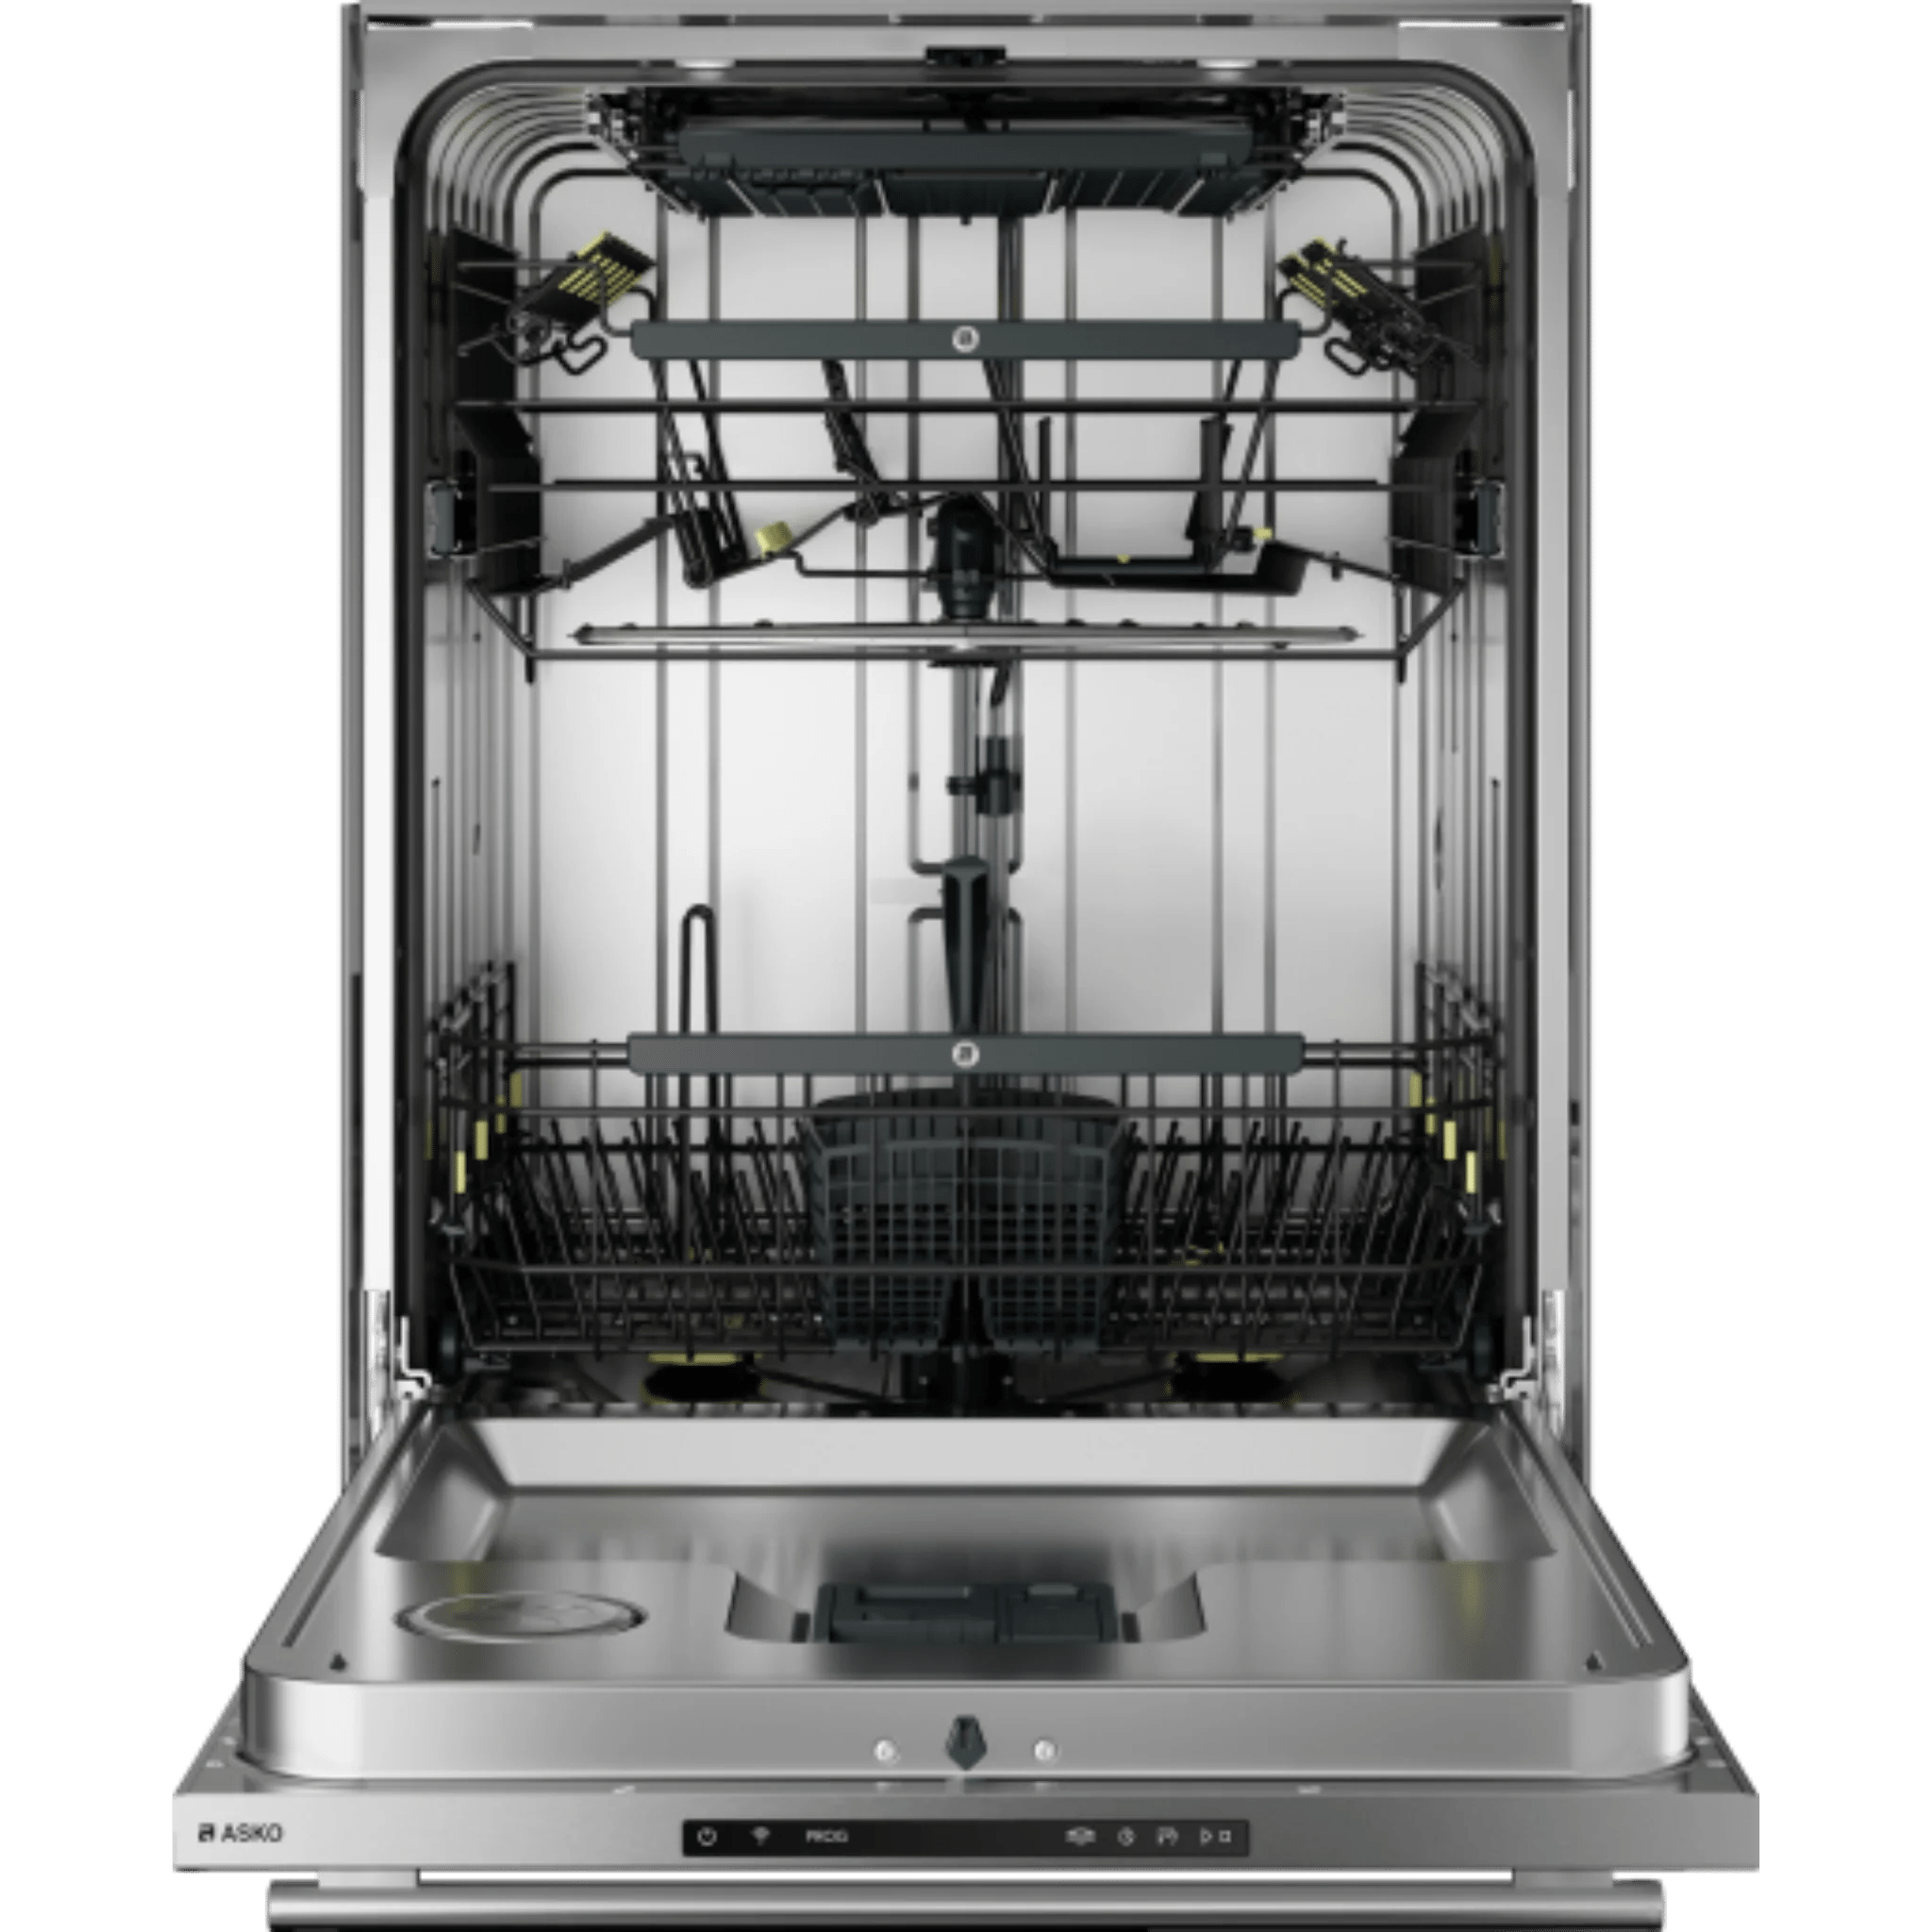 Asko Logic 24 Inch Wide 16 Place Setting Built-In Top Control Dishwasher with Tubular Handle, XXL Tub, and Auto Door Open Drying™ Dishwashers DBI565THXXLS Luxury Appliances Direct